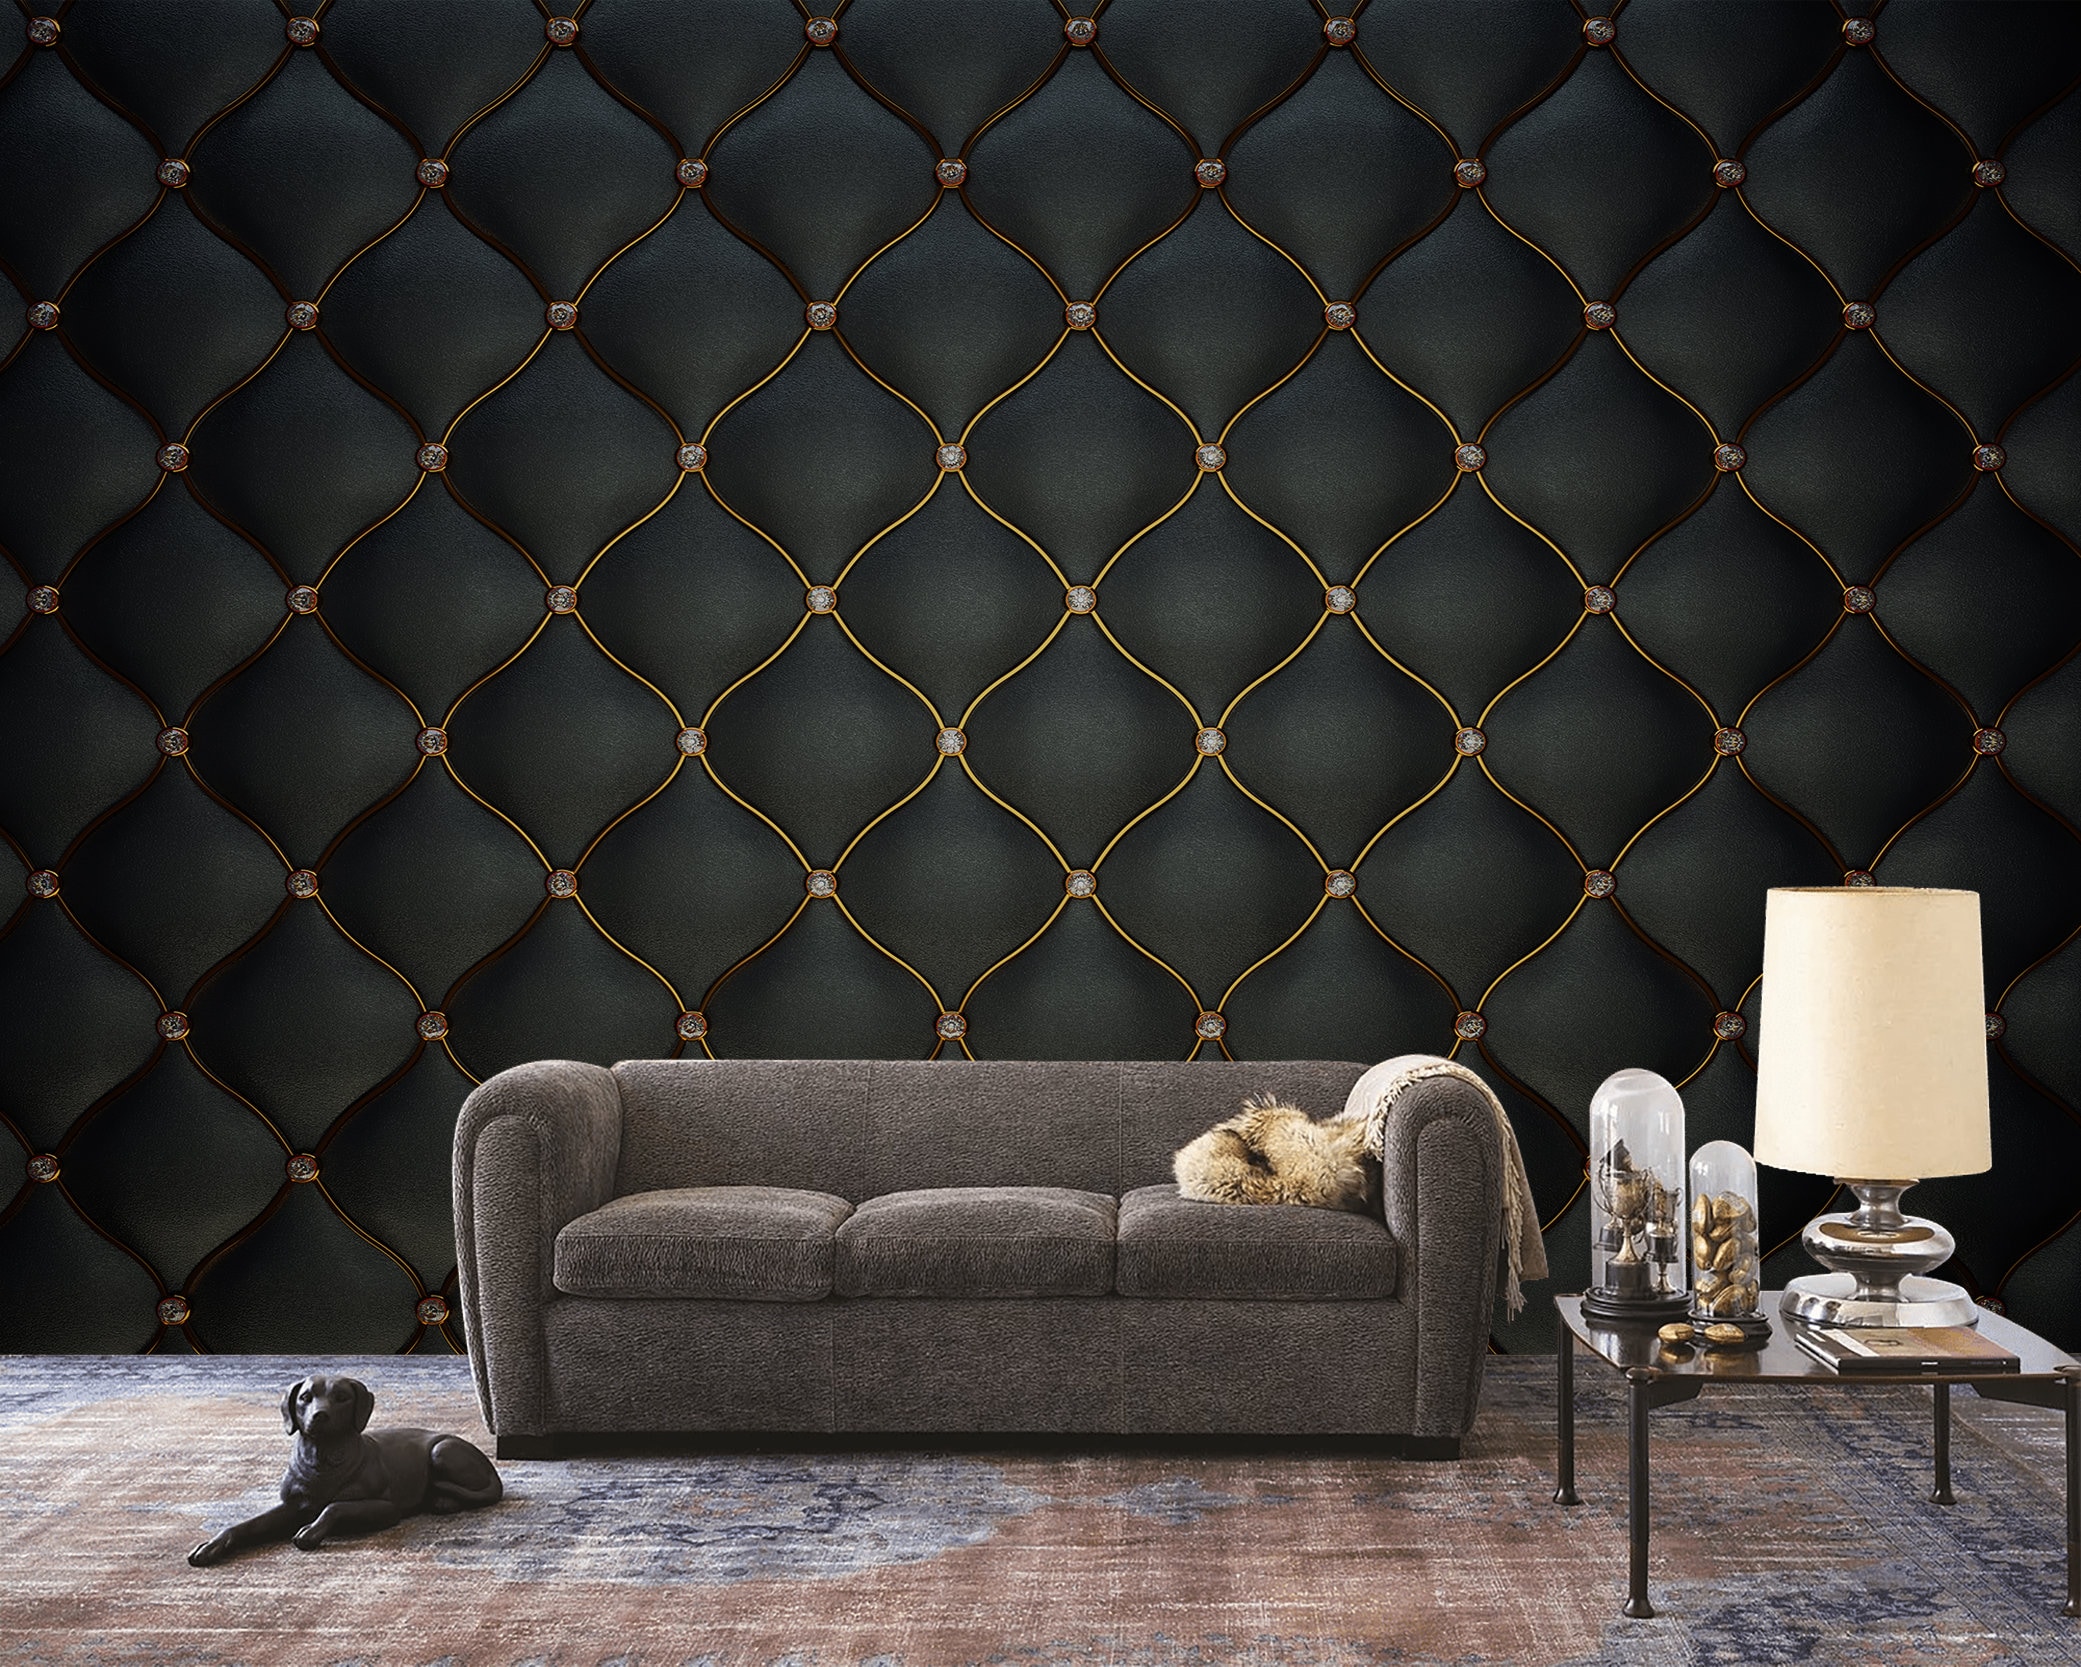 Art3d 20-pieces Decorative 3D Wall Panels Faux Leather Tile for Interior  Wall, Living Room, Bedroom,decorative Soundproofing Panel 